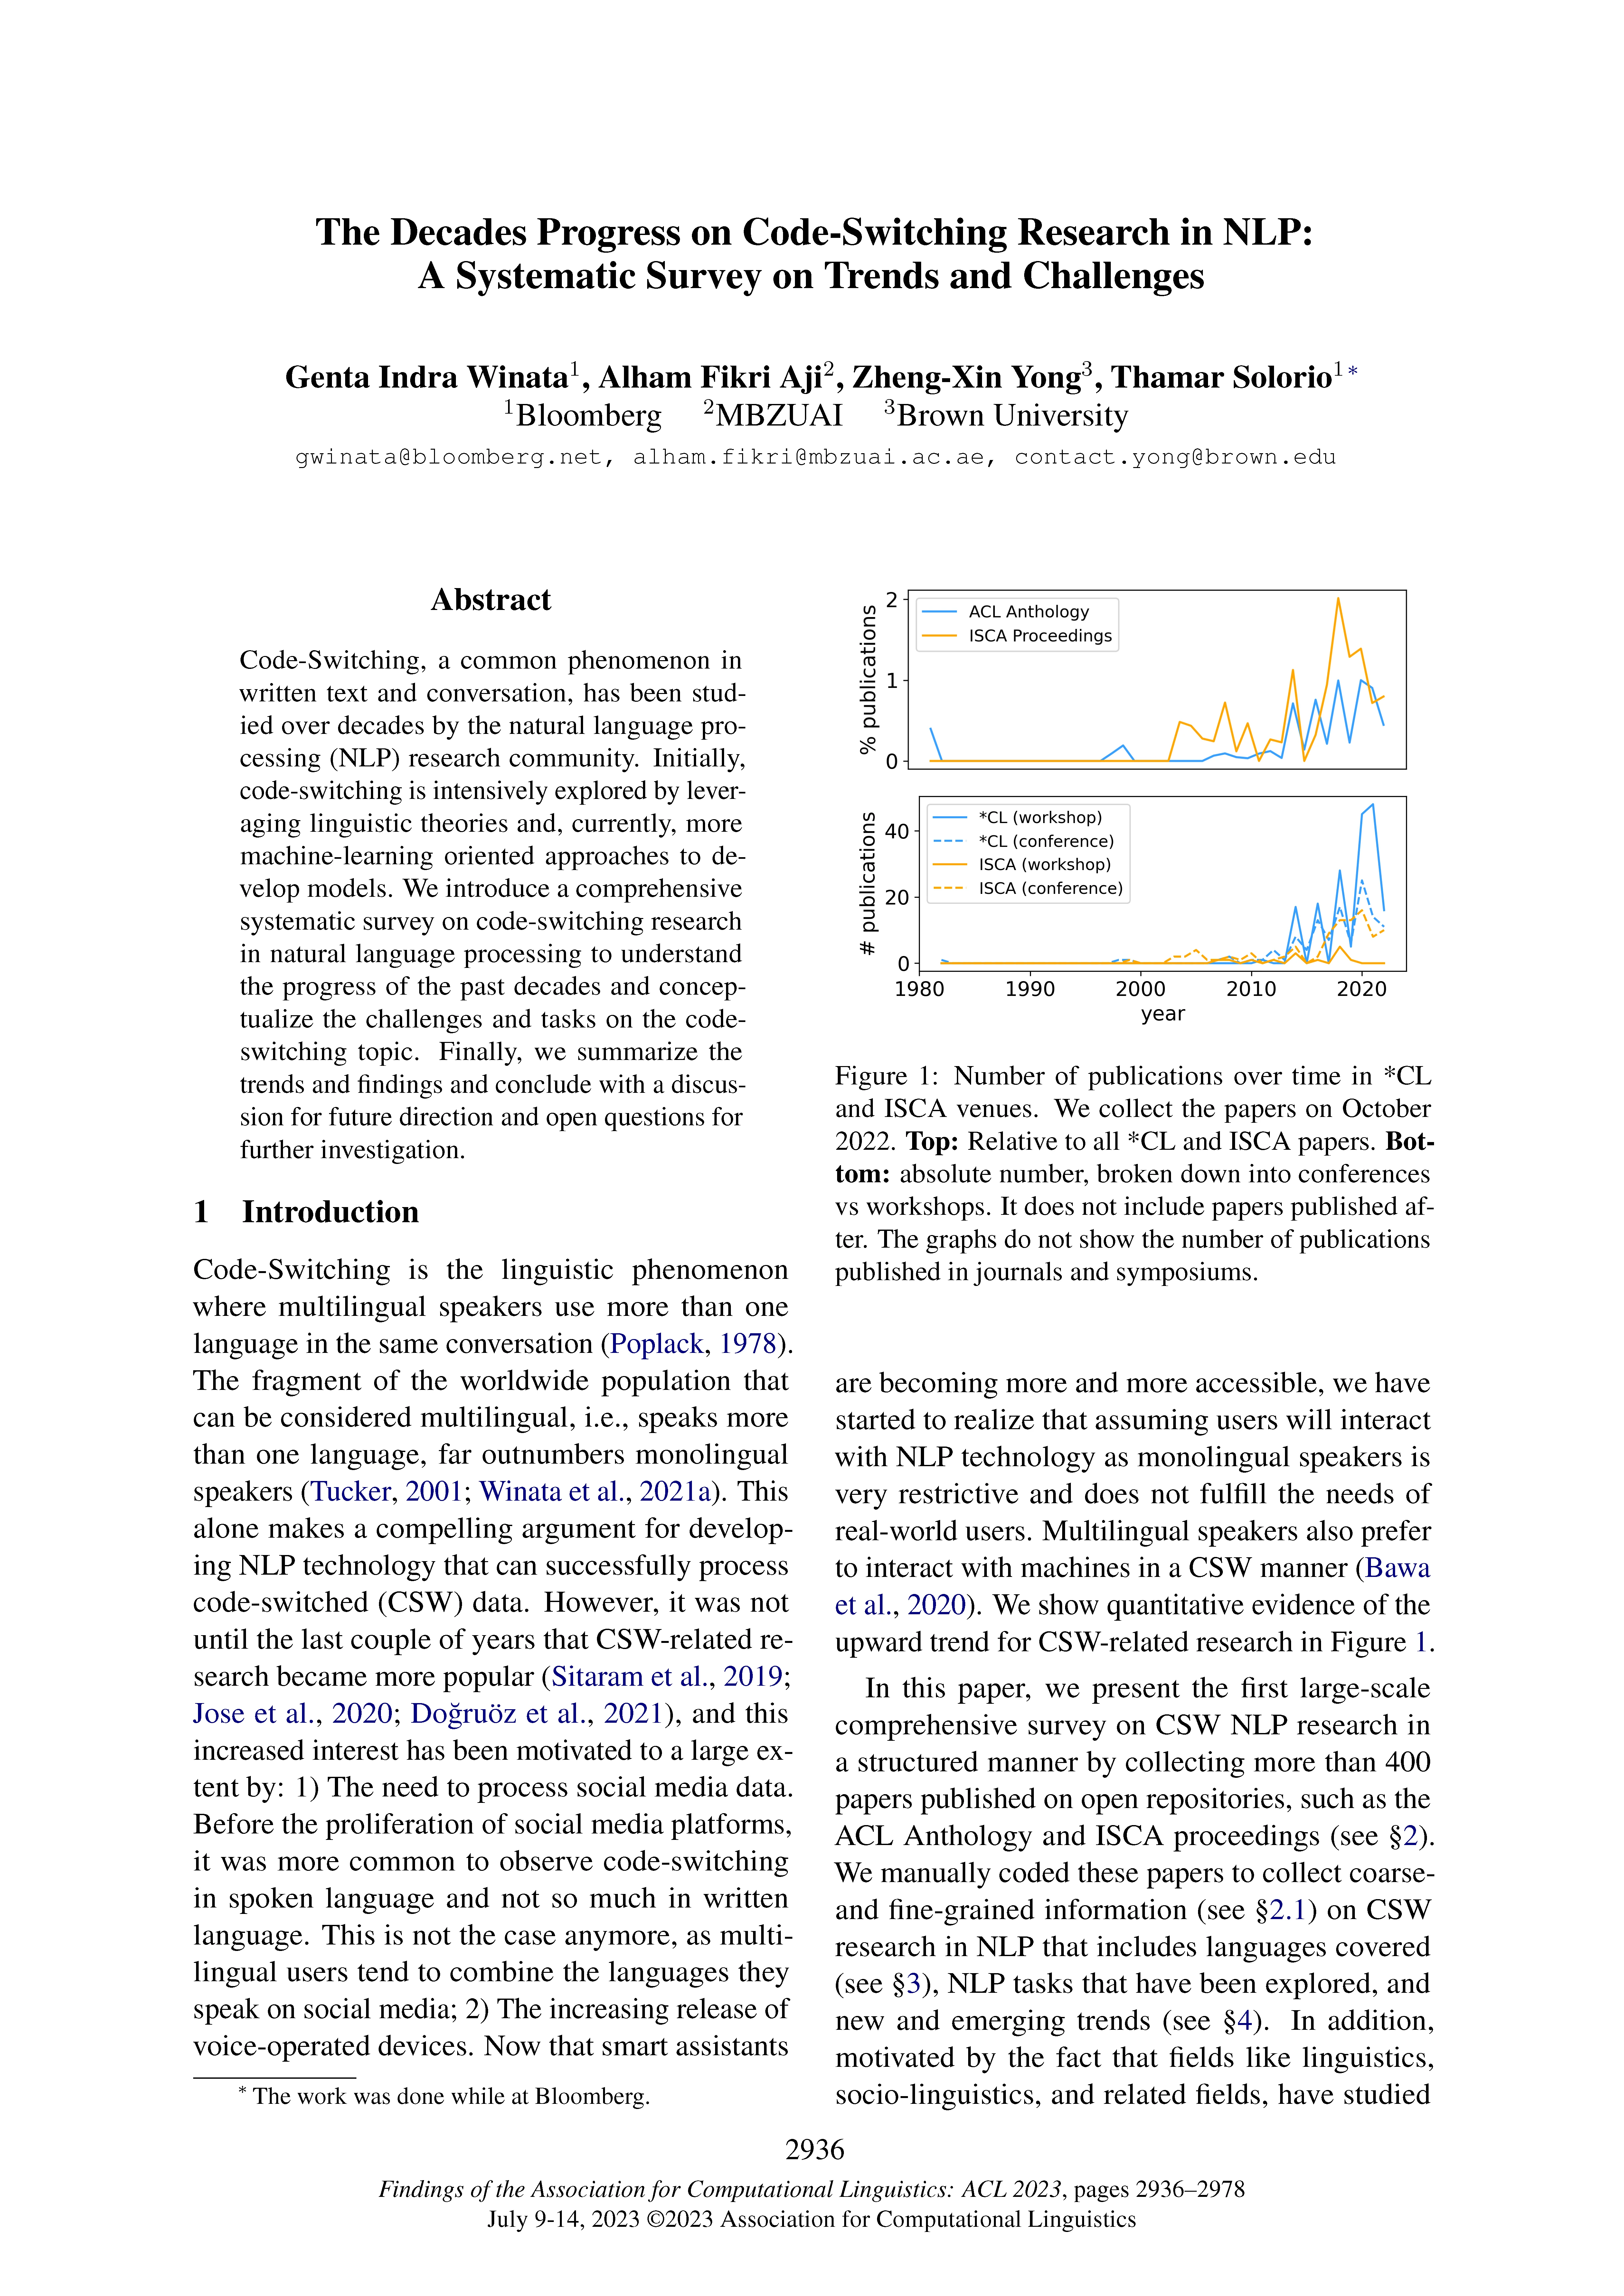 Front page of Findings of the ACL 2023 paper "The Decades Progress on Code-Switching Research in NLP: A Systematic Survey on Trends and Challenges"